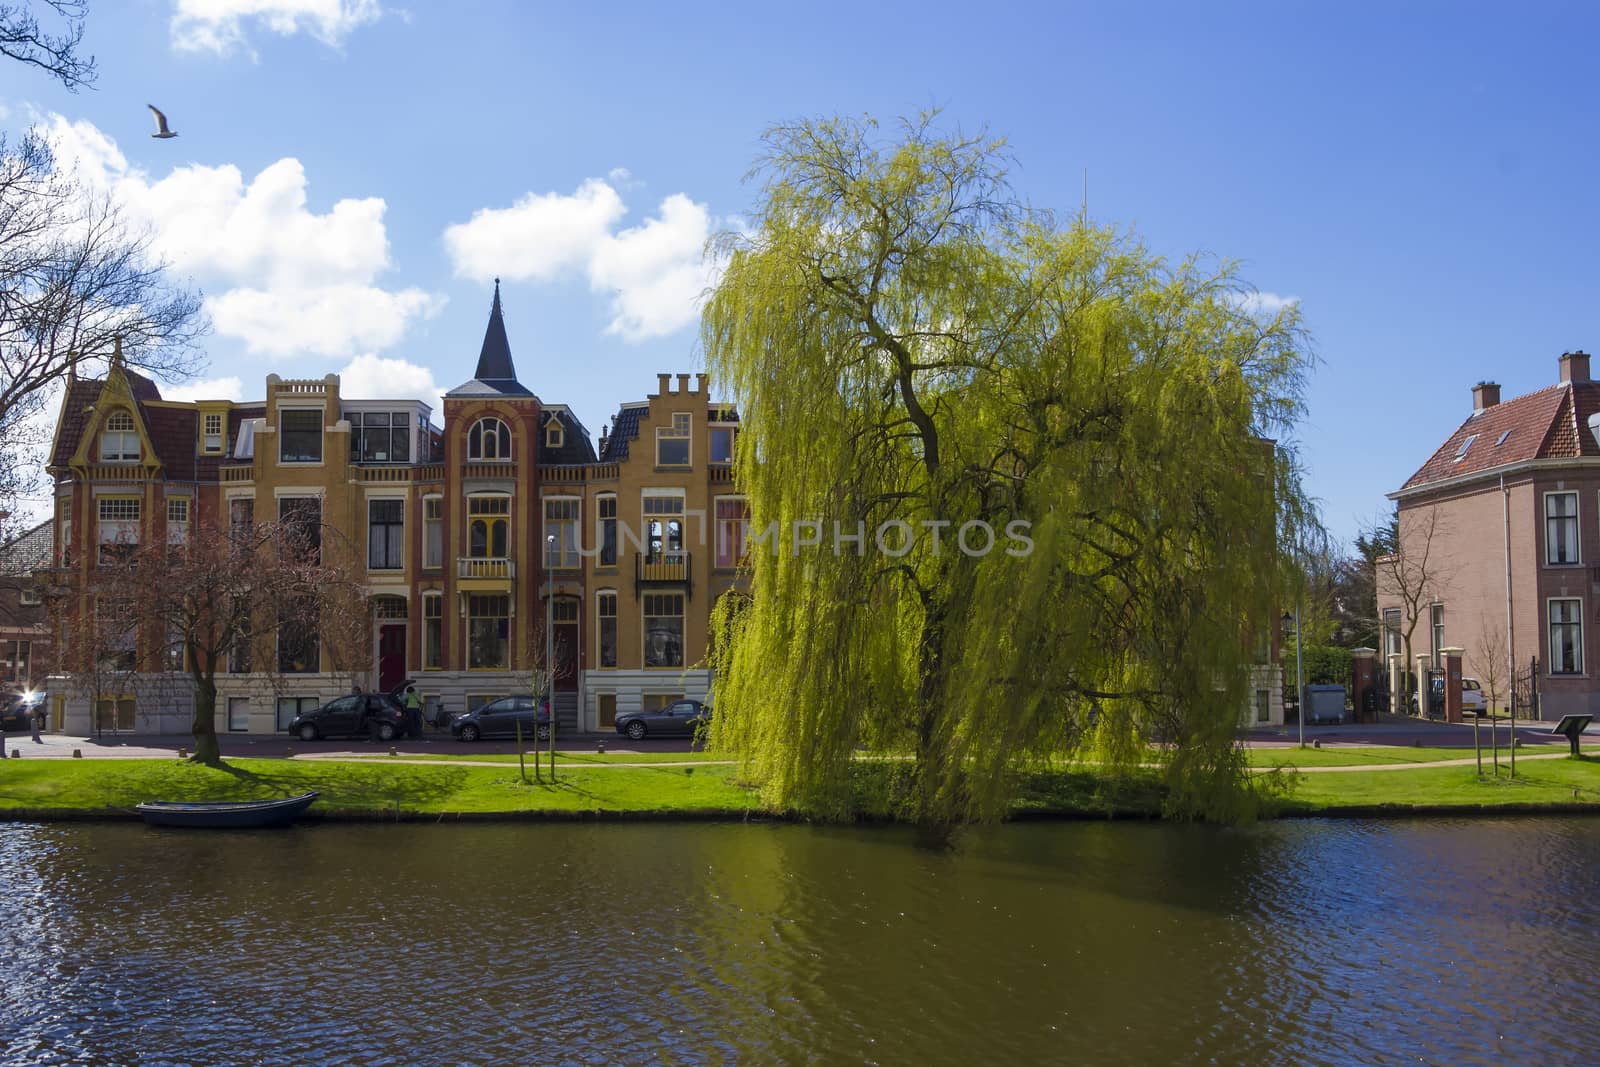 traditional Dutch houses, Alkmaar town, Holland, the Netherlands by Tetyana